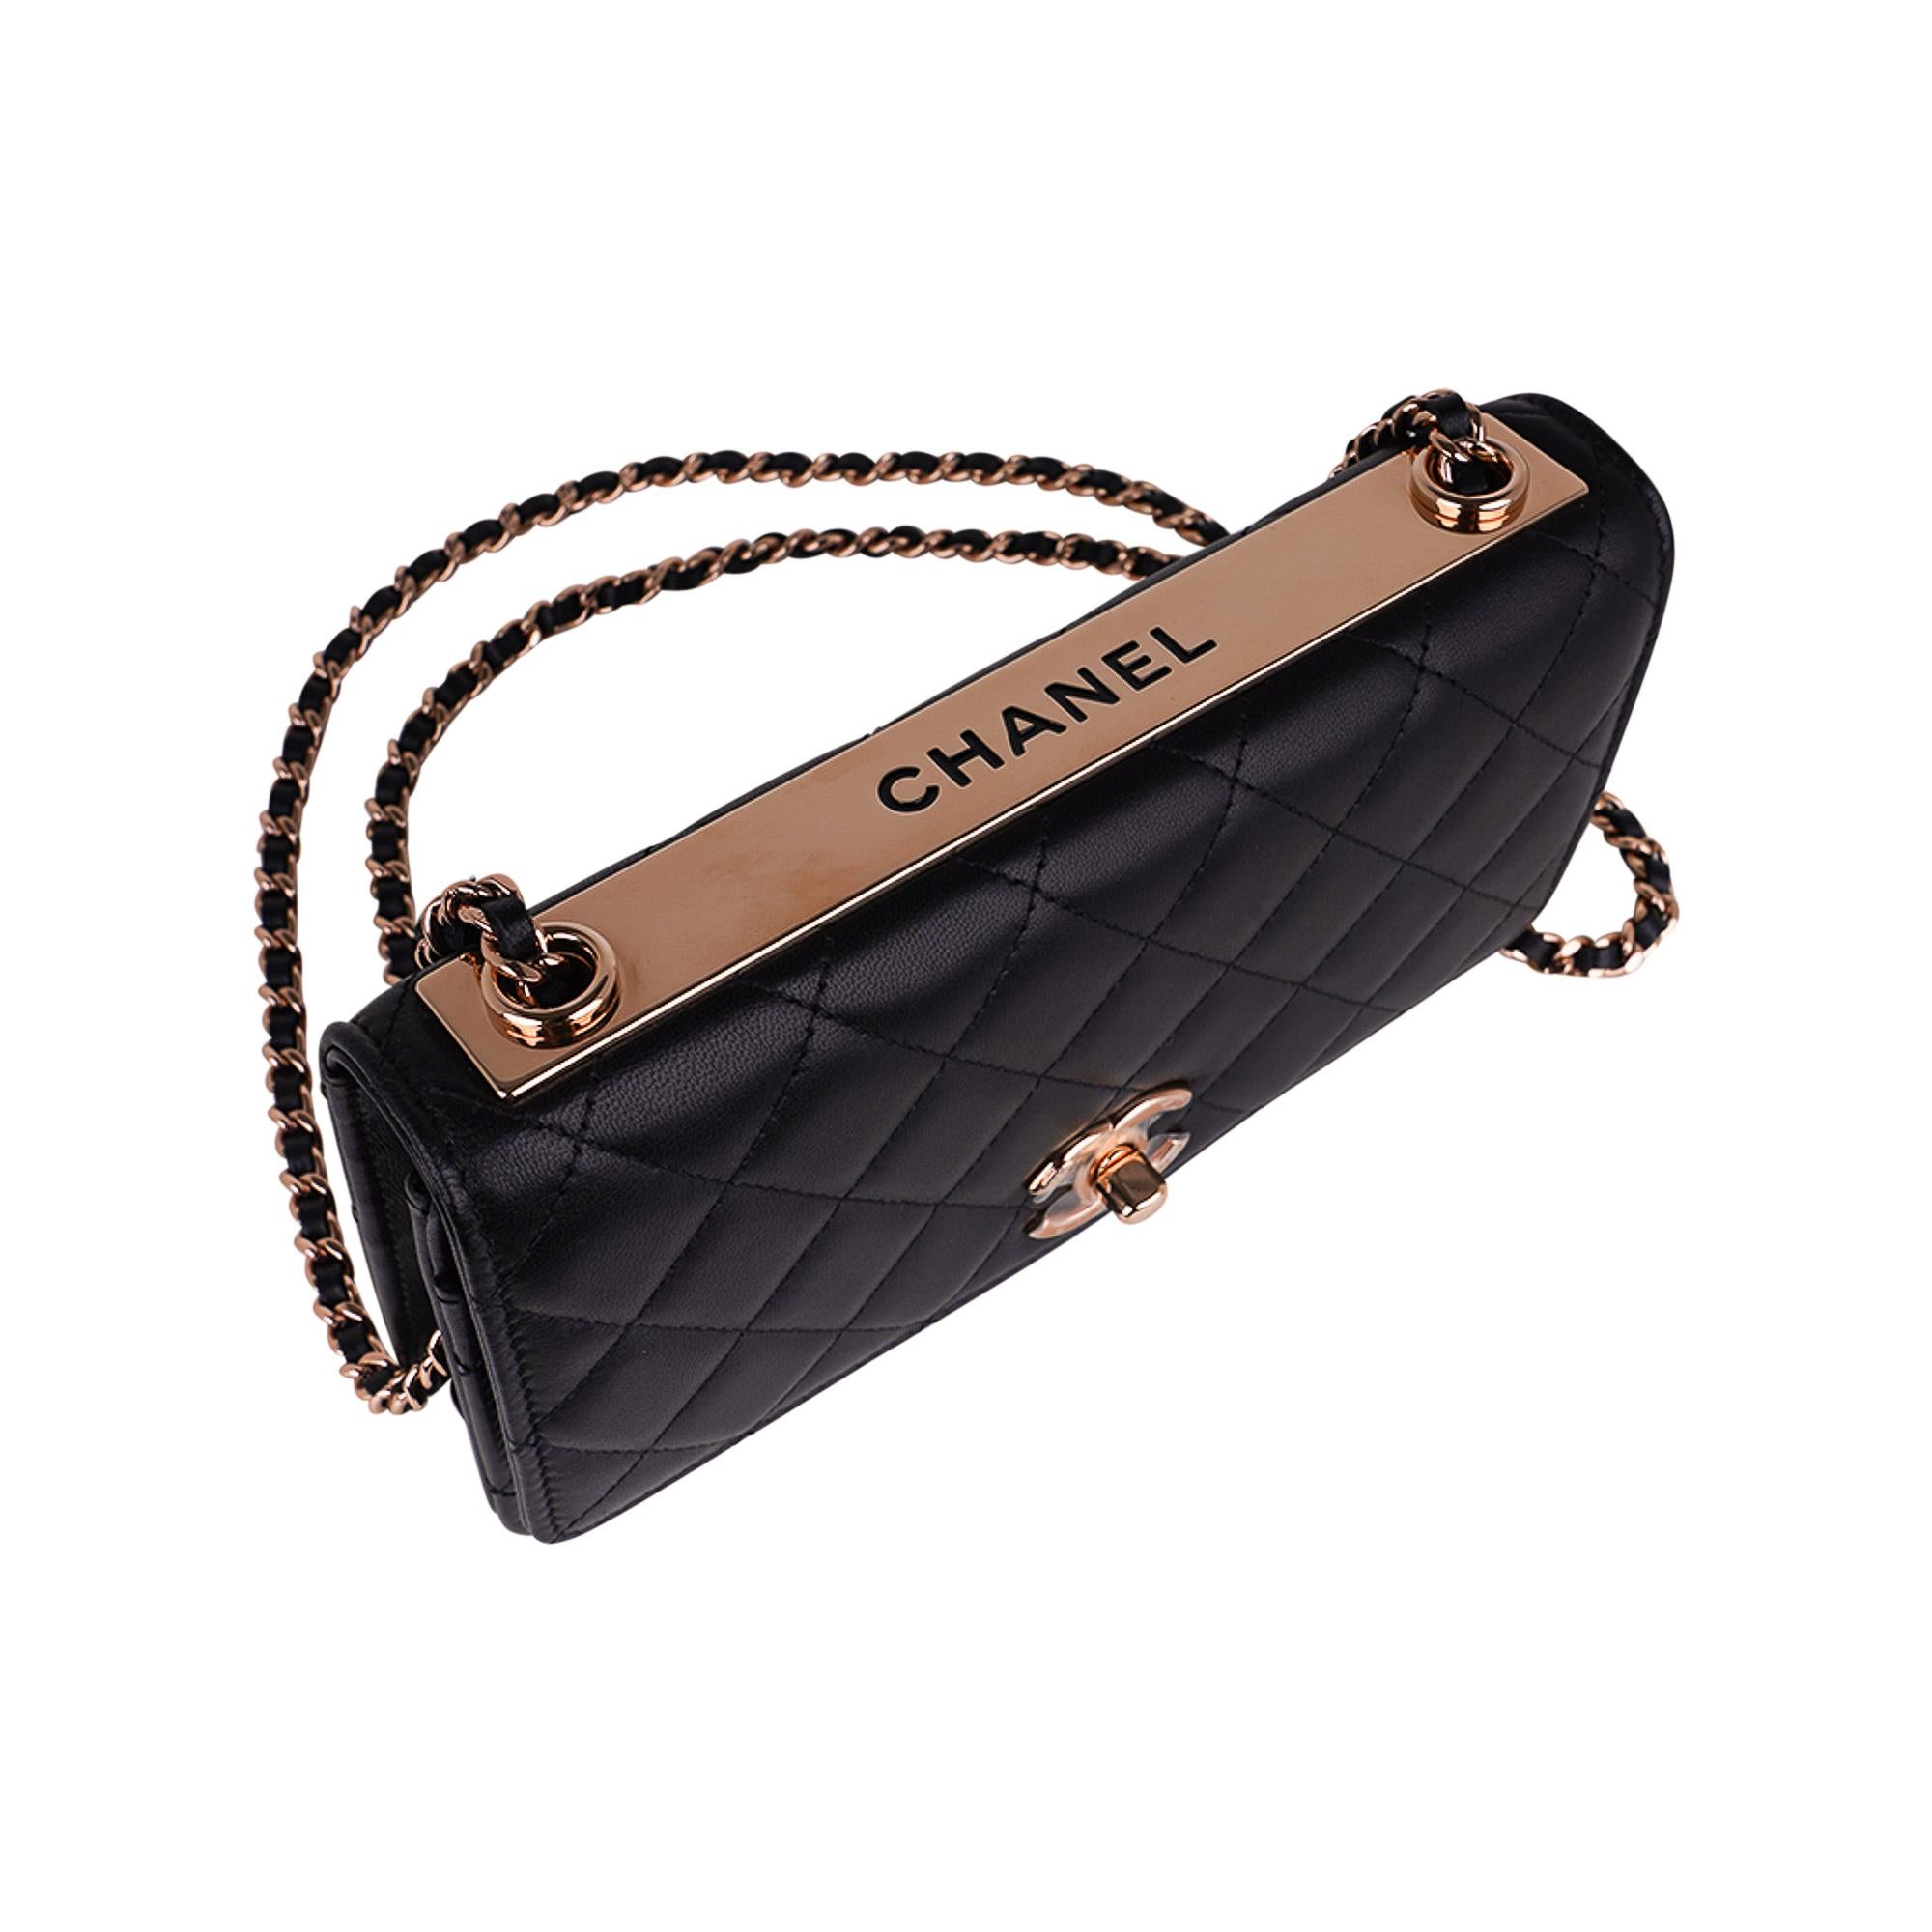 Mightychic offers a Chanel Wallet on Chain featured in Black lambskin with Rose Gold hardware.
This bag is sold out company wide!
Metal embossed plaque at top of bag.
Zip pocket under flap.
This piece can be carried as shoulder or cross body.
1